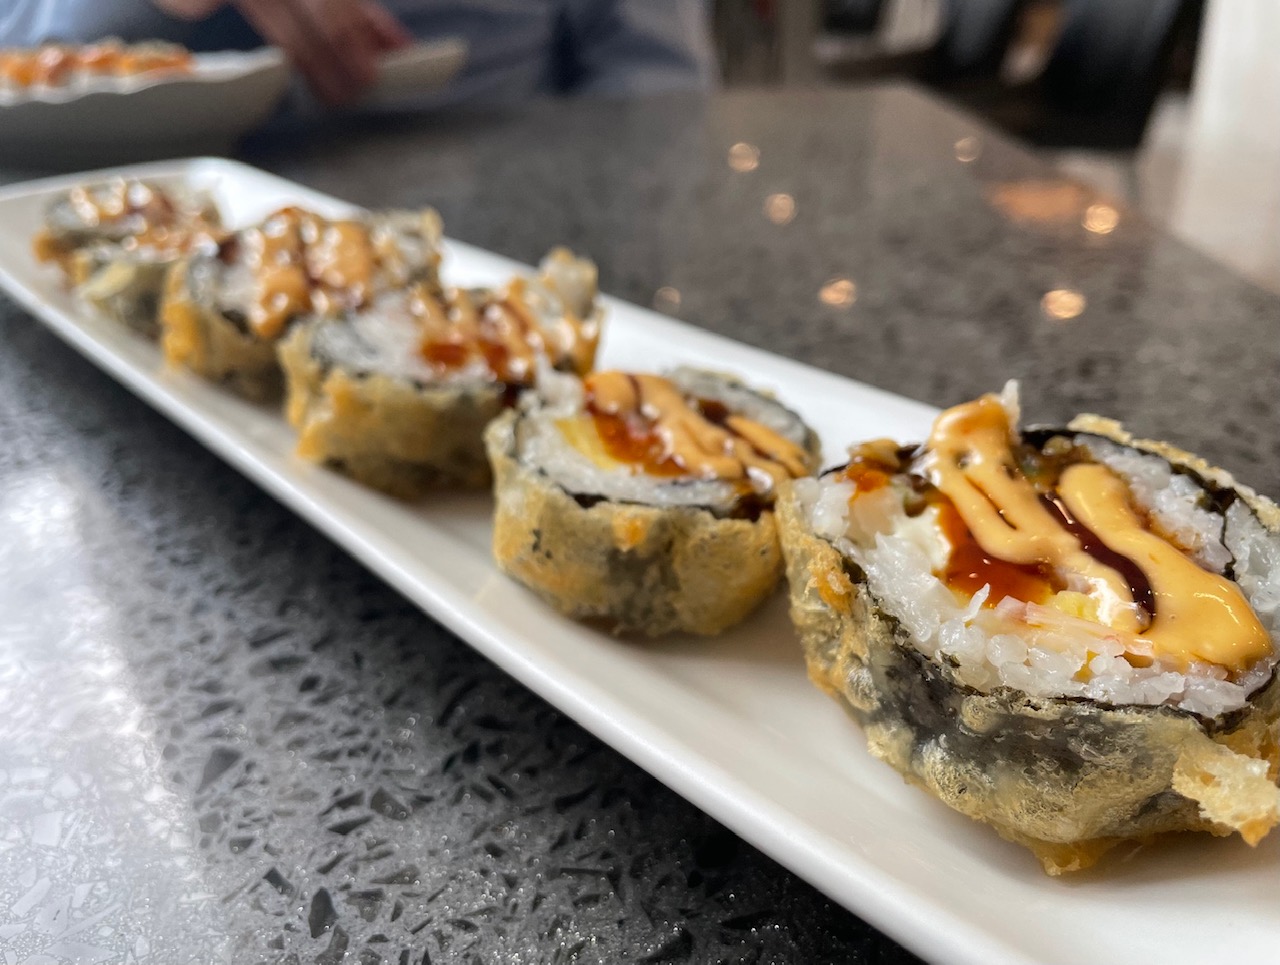 On a long white rectangular plate, there is a fried sushi roll with drizzles of sauce on it. Photo by Alyssa Buckley.